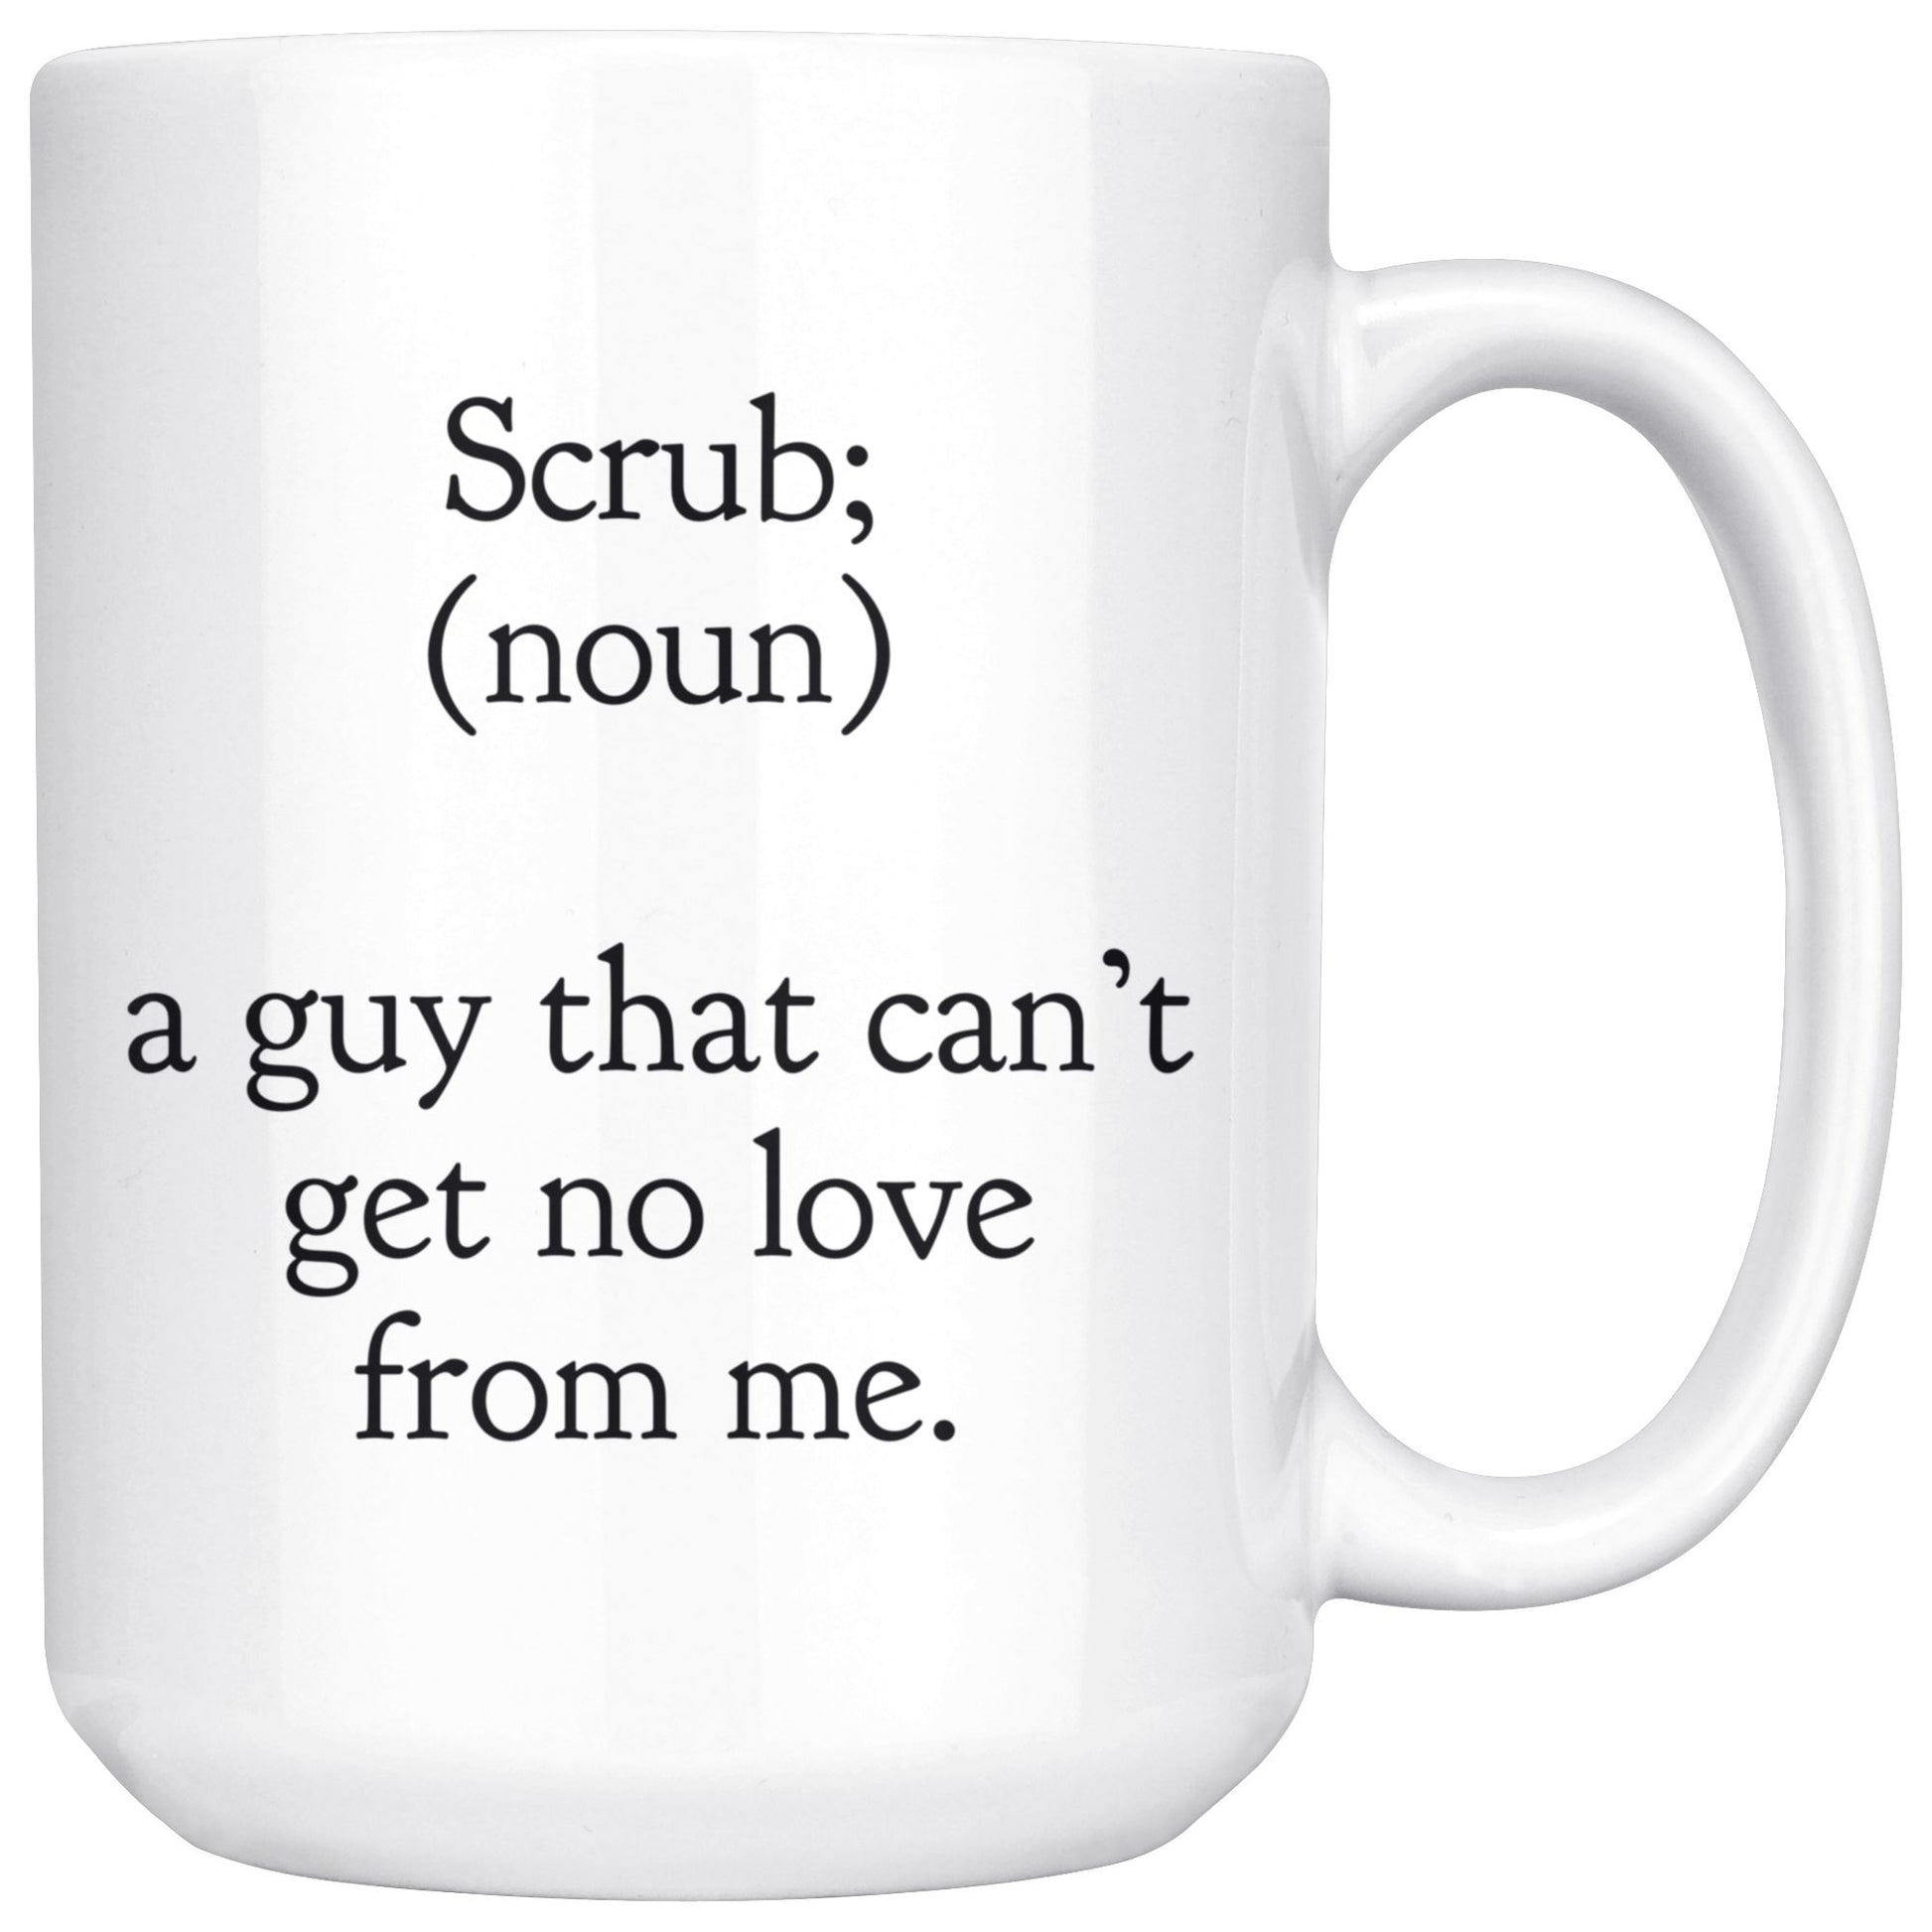 "Scrub - A Guy That Can't Get No Love From Me" - Coffee Mug Drinkware White - 15oz 